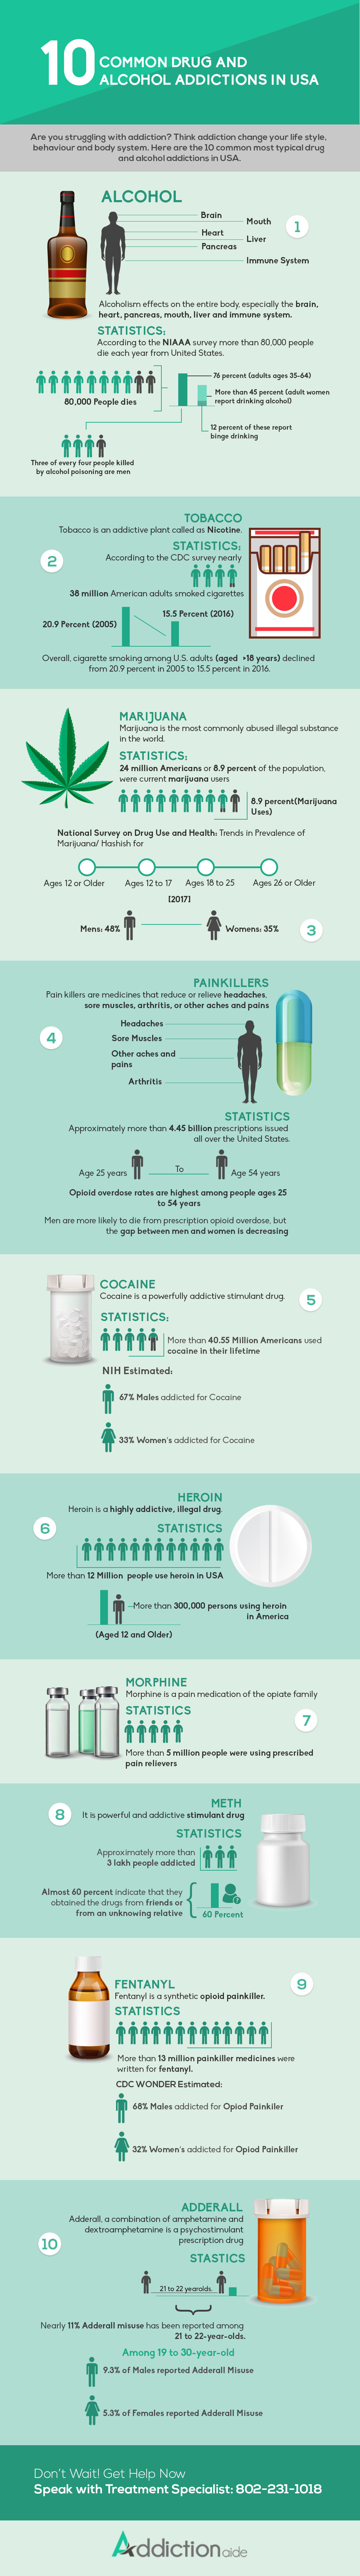 10 Common Drug and Alcohol Addictions in USA